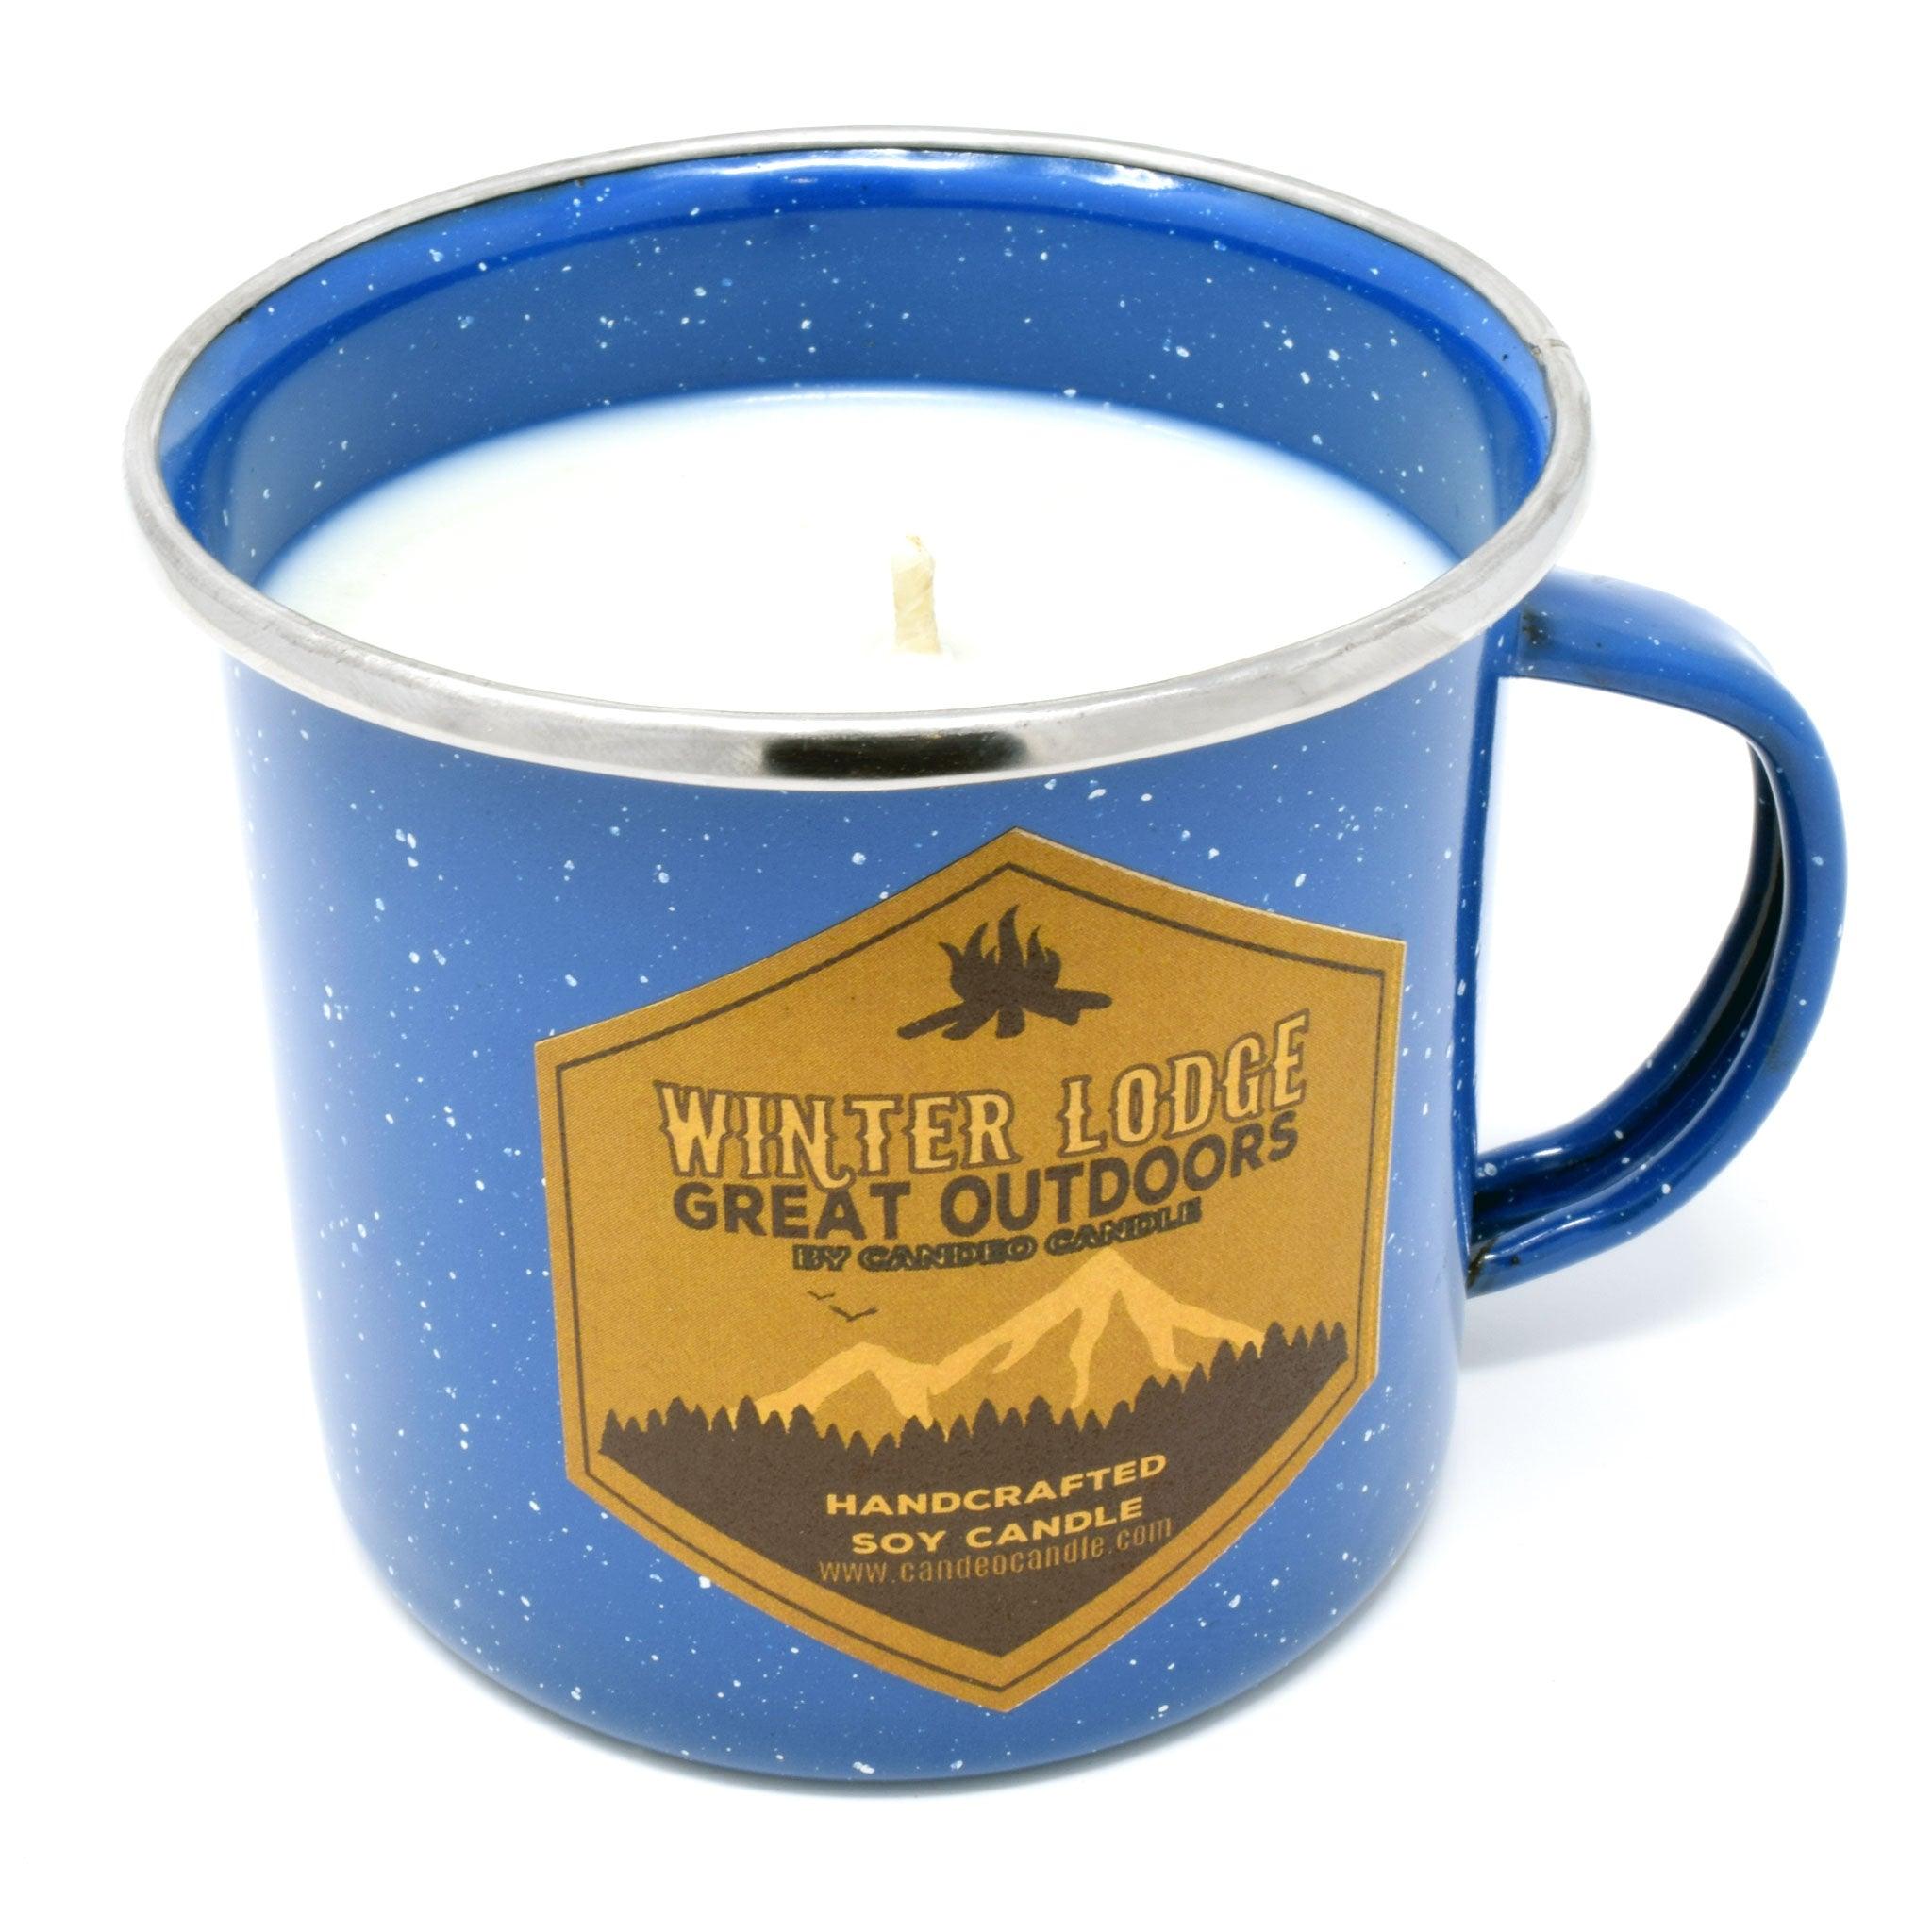 Winter Lodge, Soy Candle in Enamel Camping Mug, 10oz - Candeo Candle